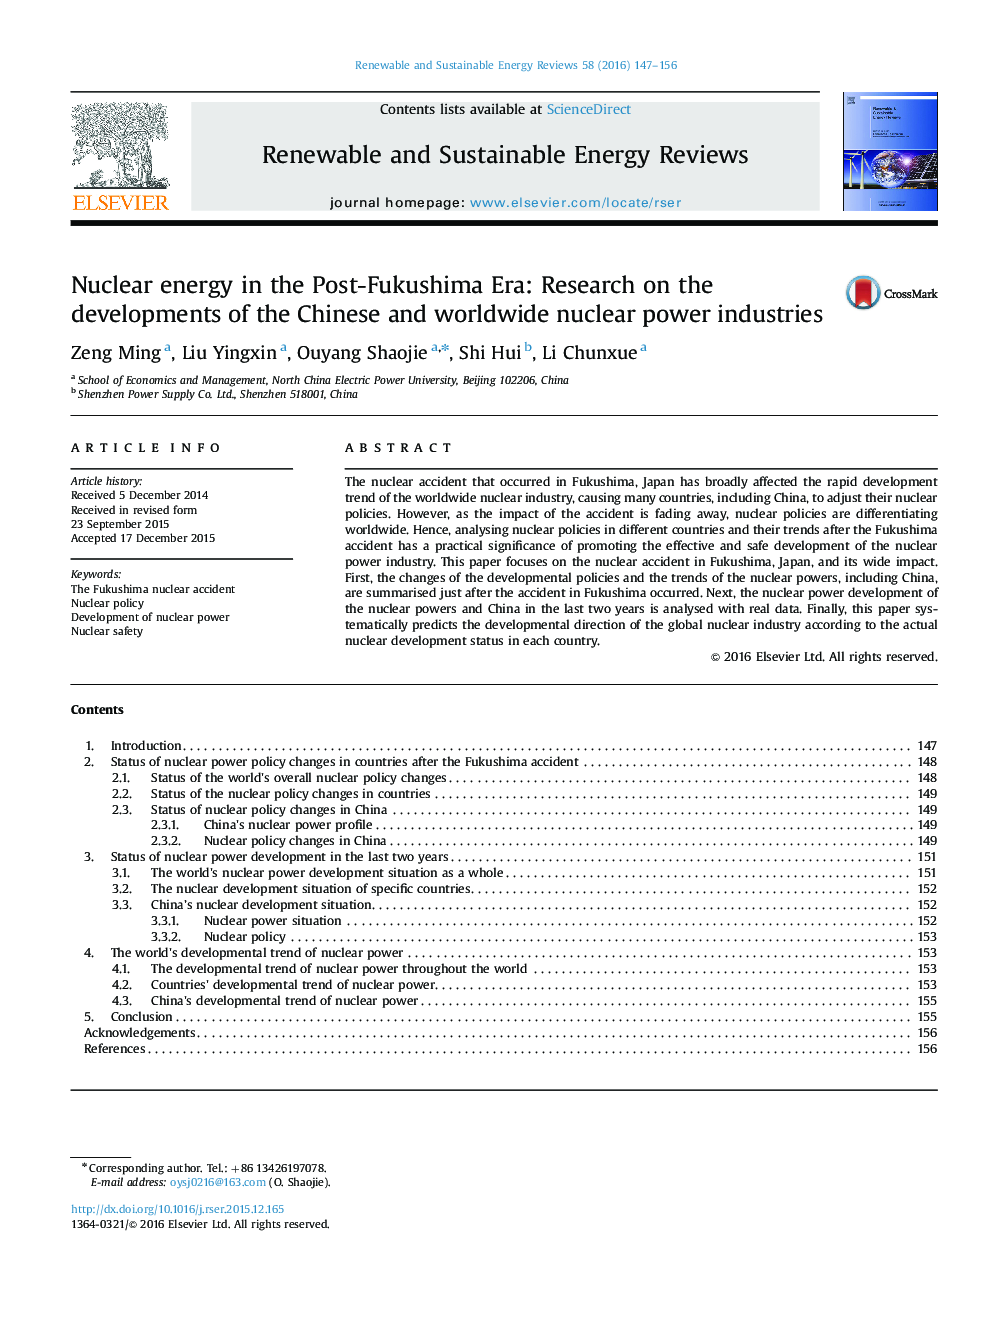 Nuclear energy in the Post-Fukushima Era: Research on the developments of the Chinese and worldwide nuclear power industries